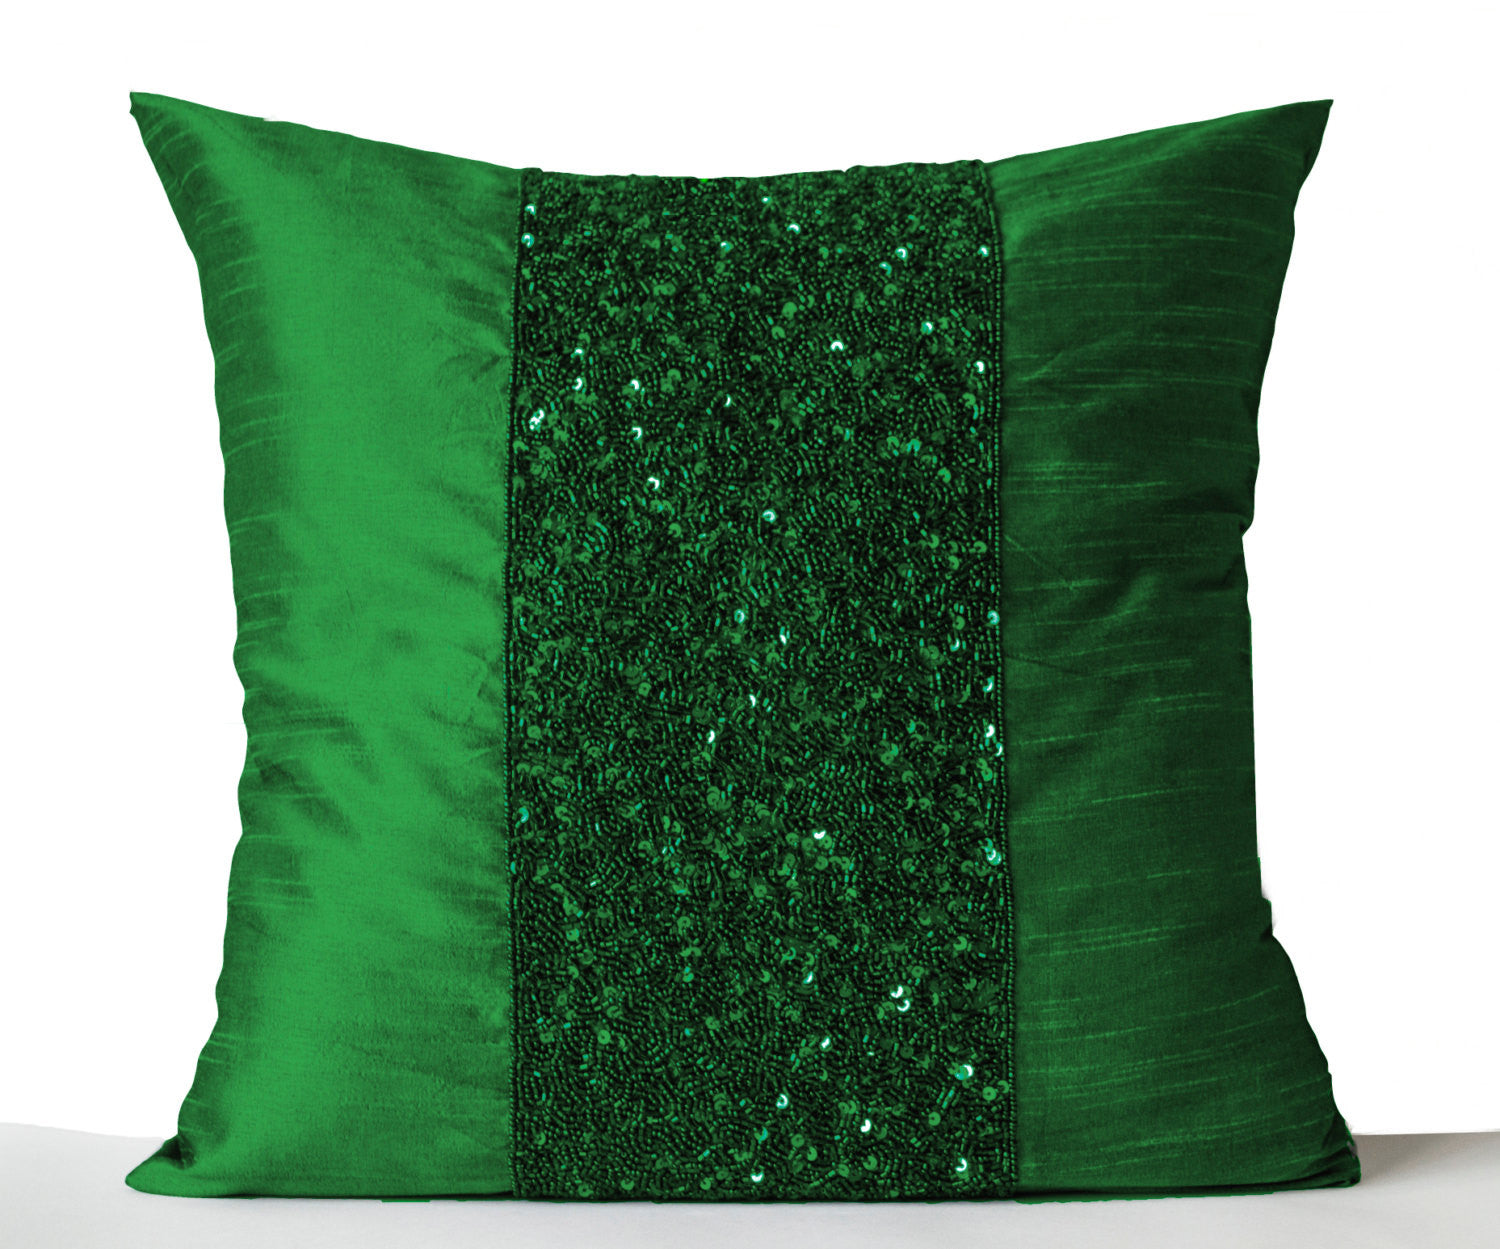 Handmade emerald green silk throw pillows with embroidery